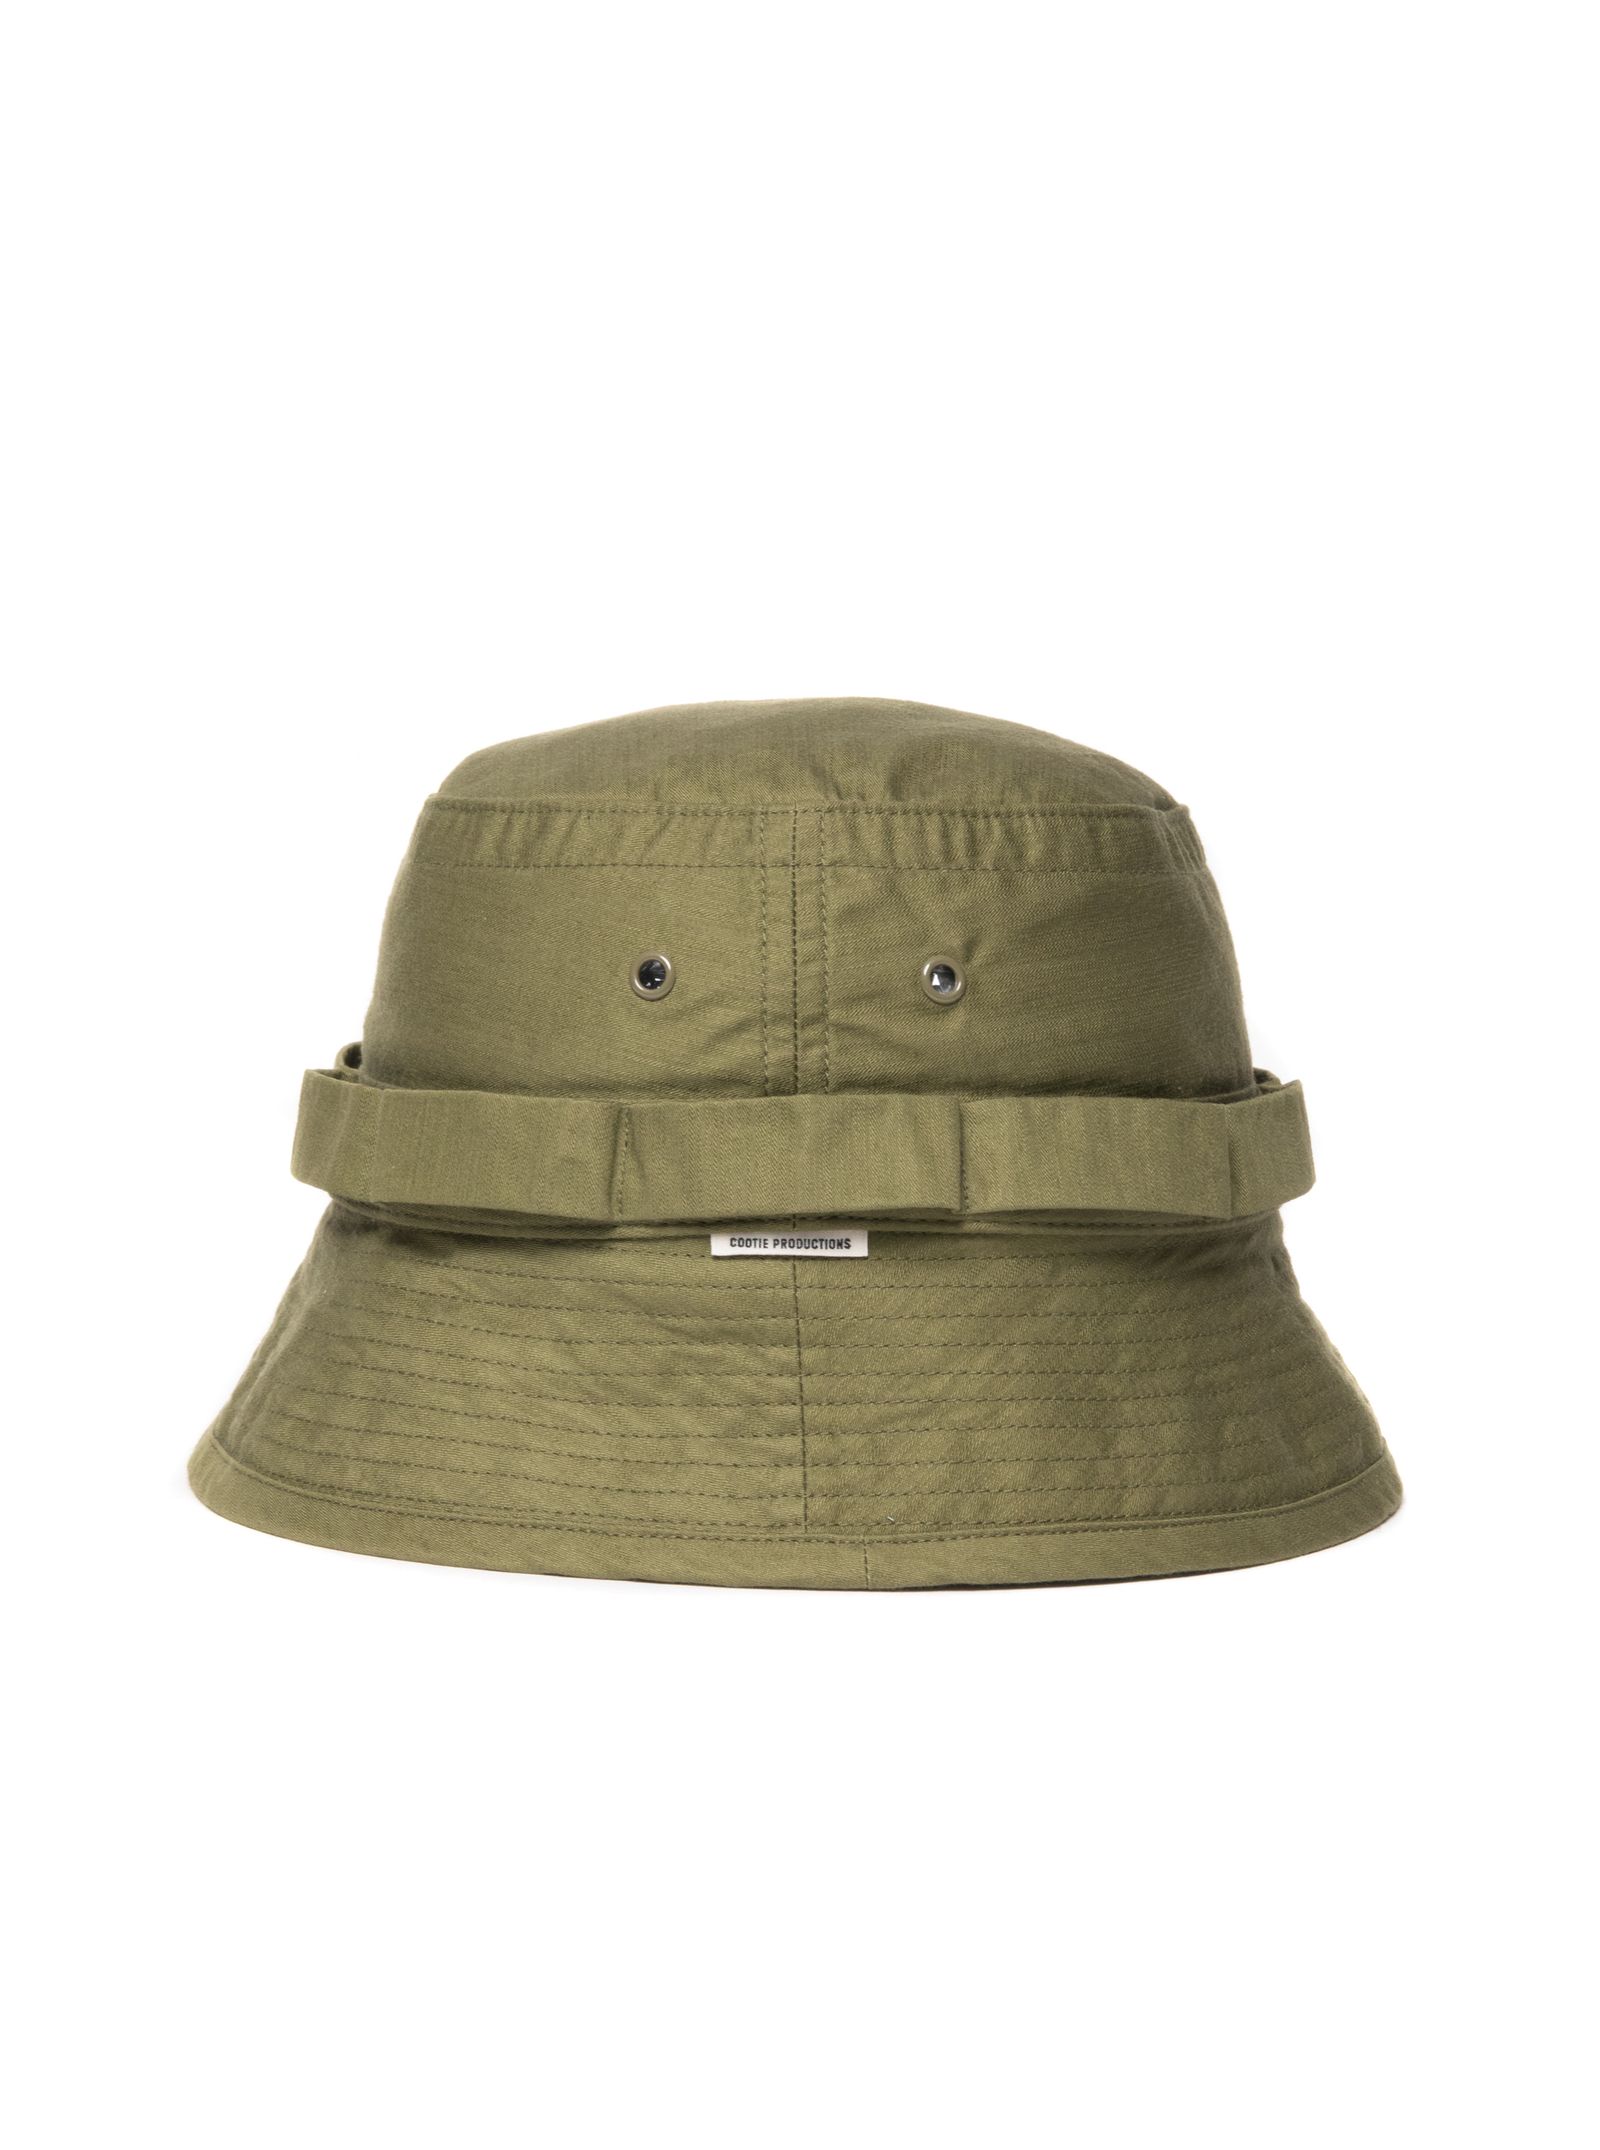 COOTIE PRODUCTIONS - Back Satin Boonie Bucket Hat (BLACK 